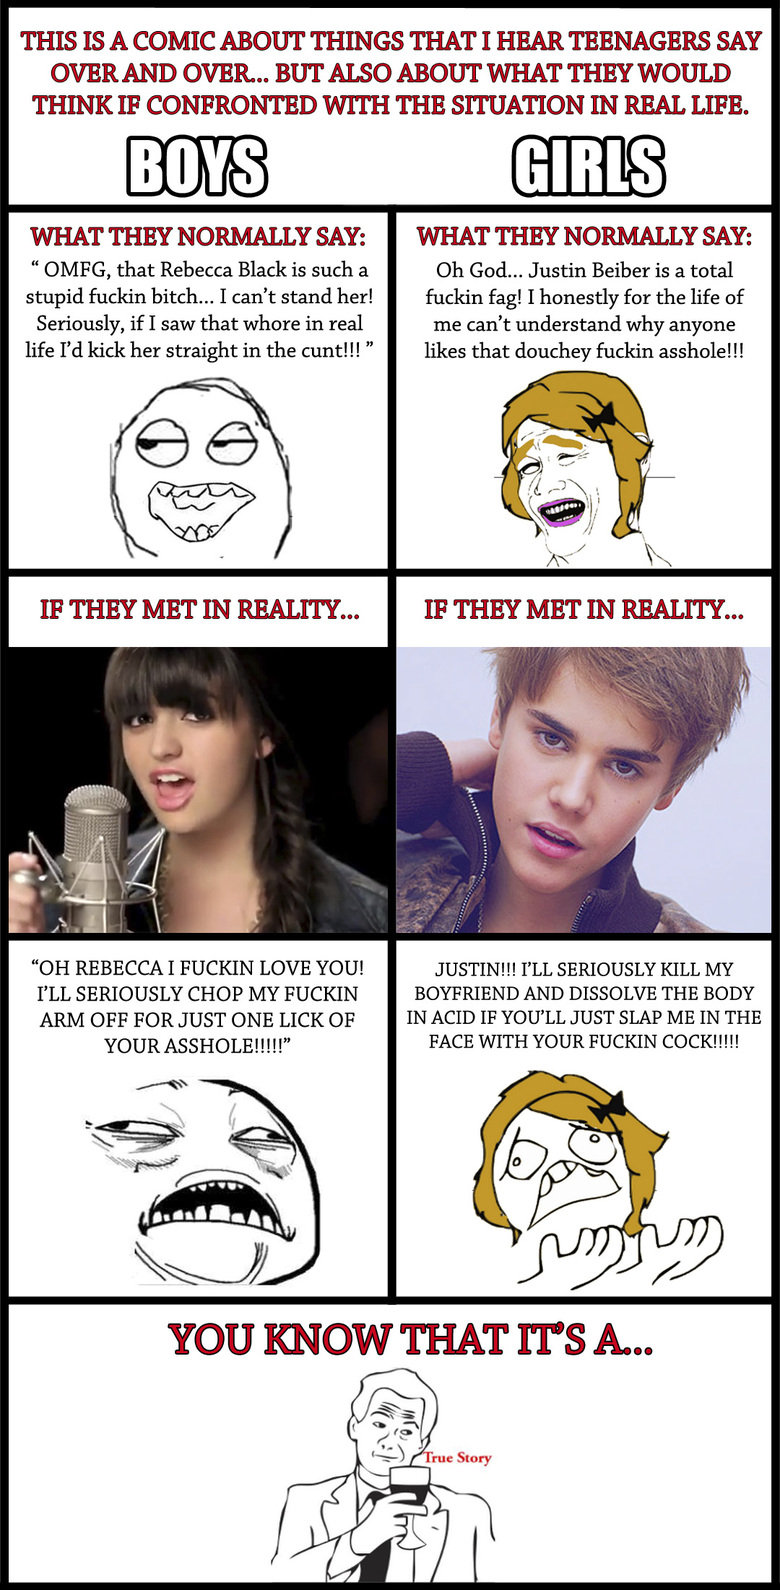 What teens really think. I'll tell you what, I'd eat rebecca black's pussy like a starving man would eat a filet mignon.. THIS IS A COMIC ABOUT THINGS THAT I HE